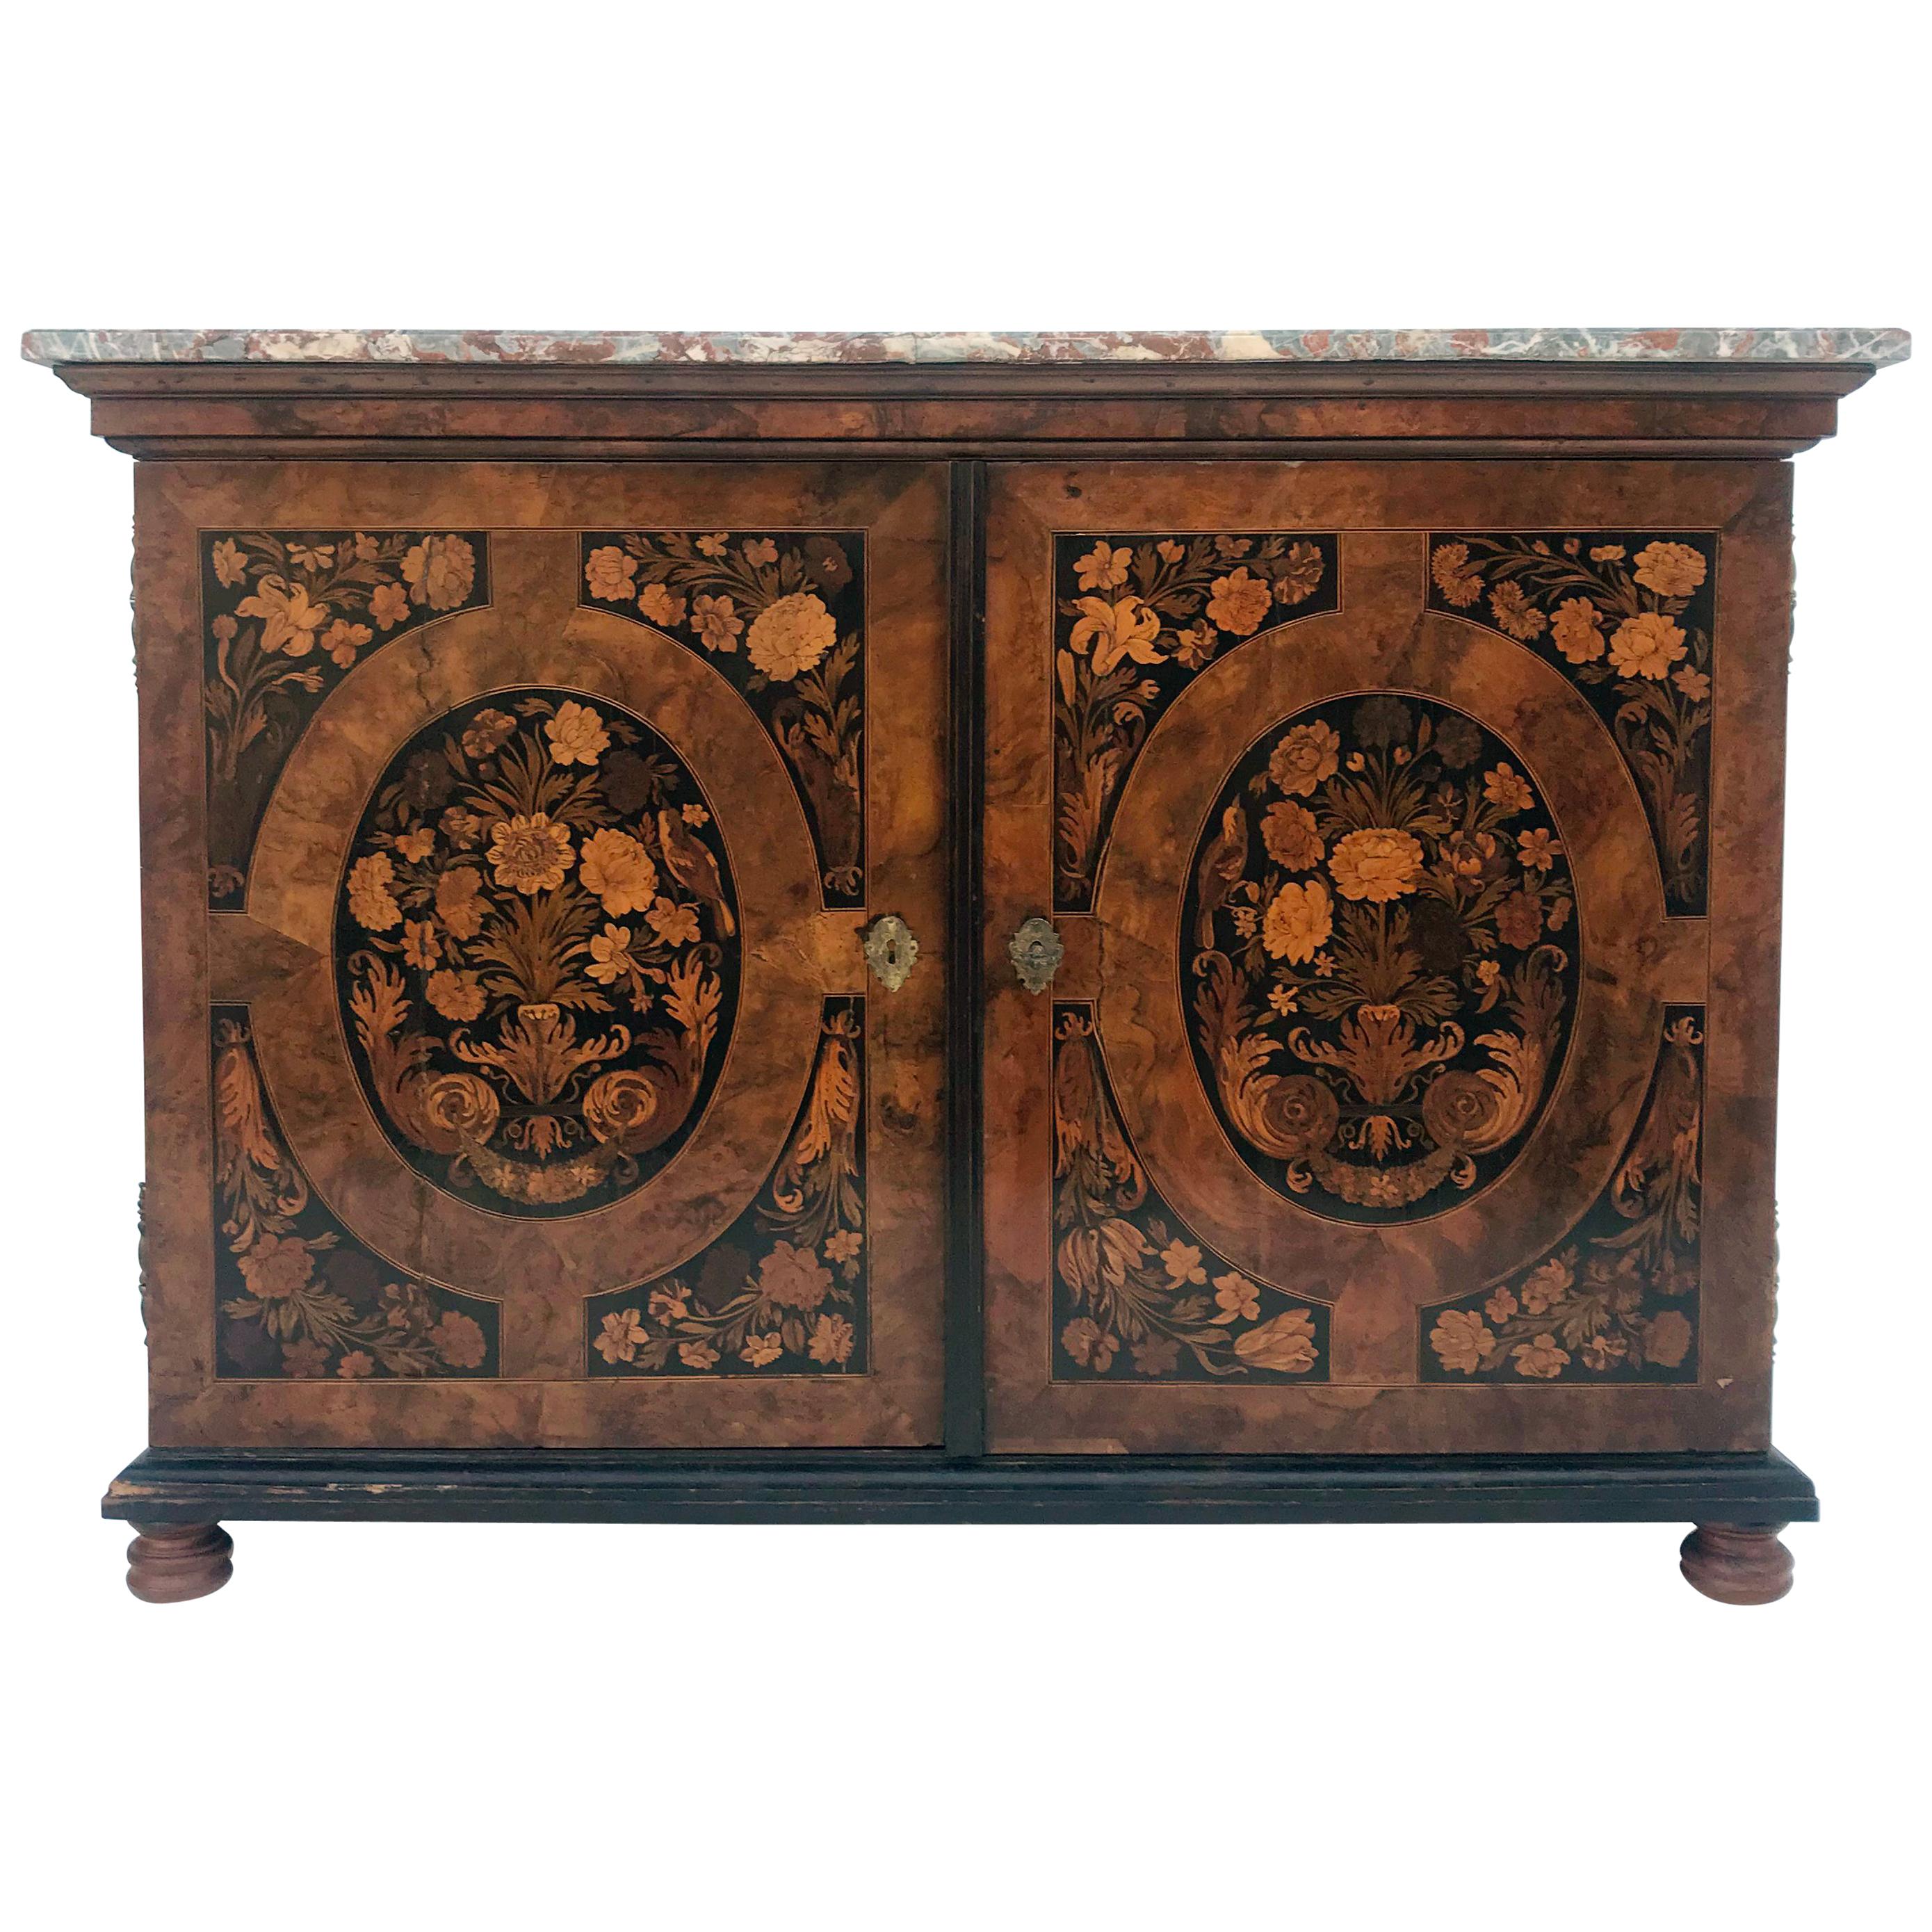 Attributed to Thomas Hache, Baroque Sideboard, Grenoble, France, 1740s